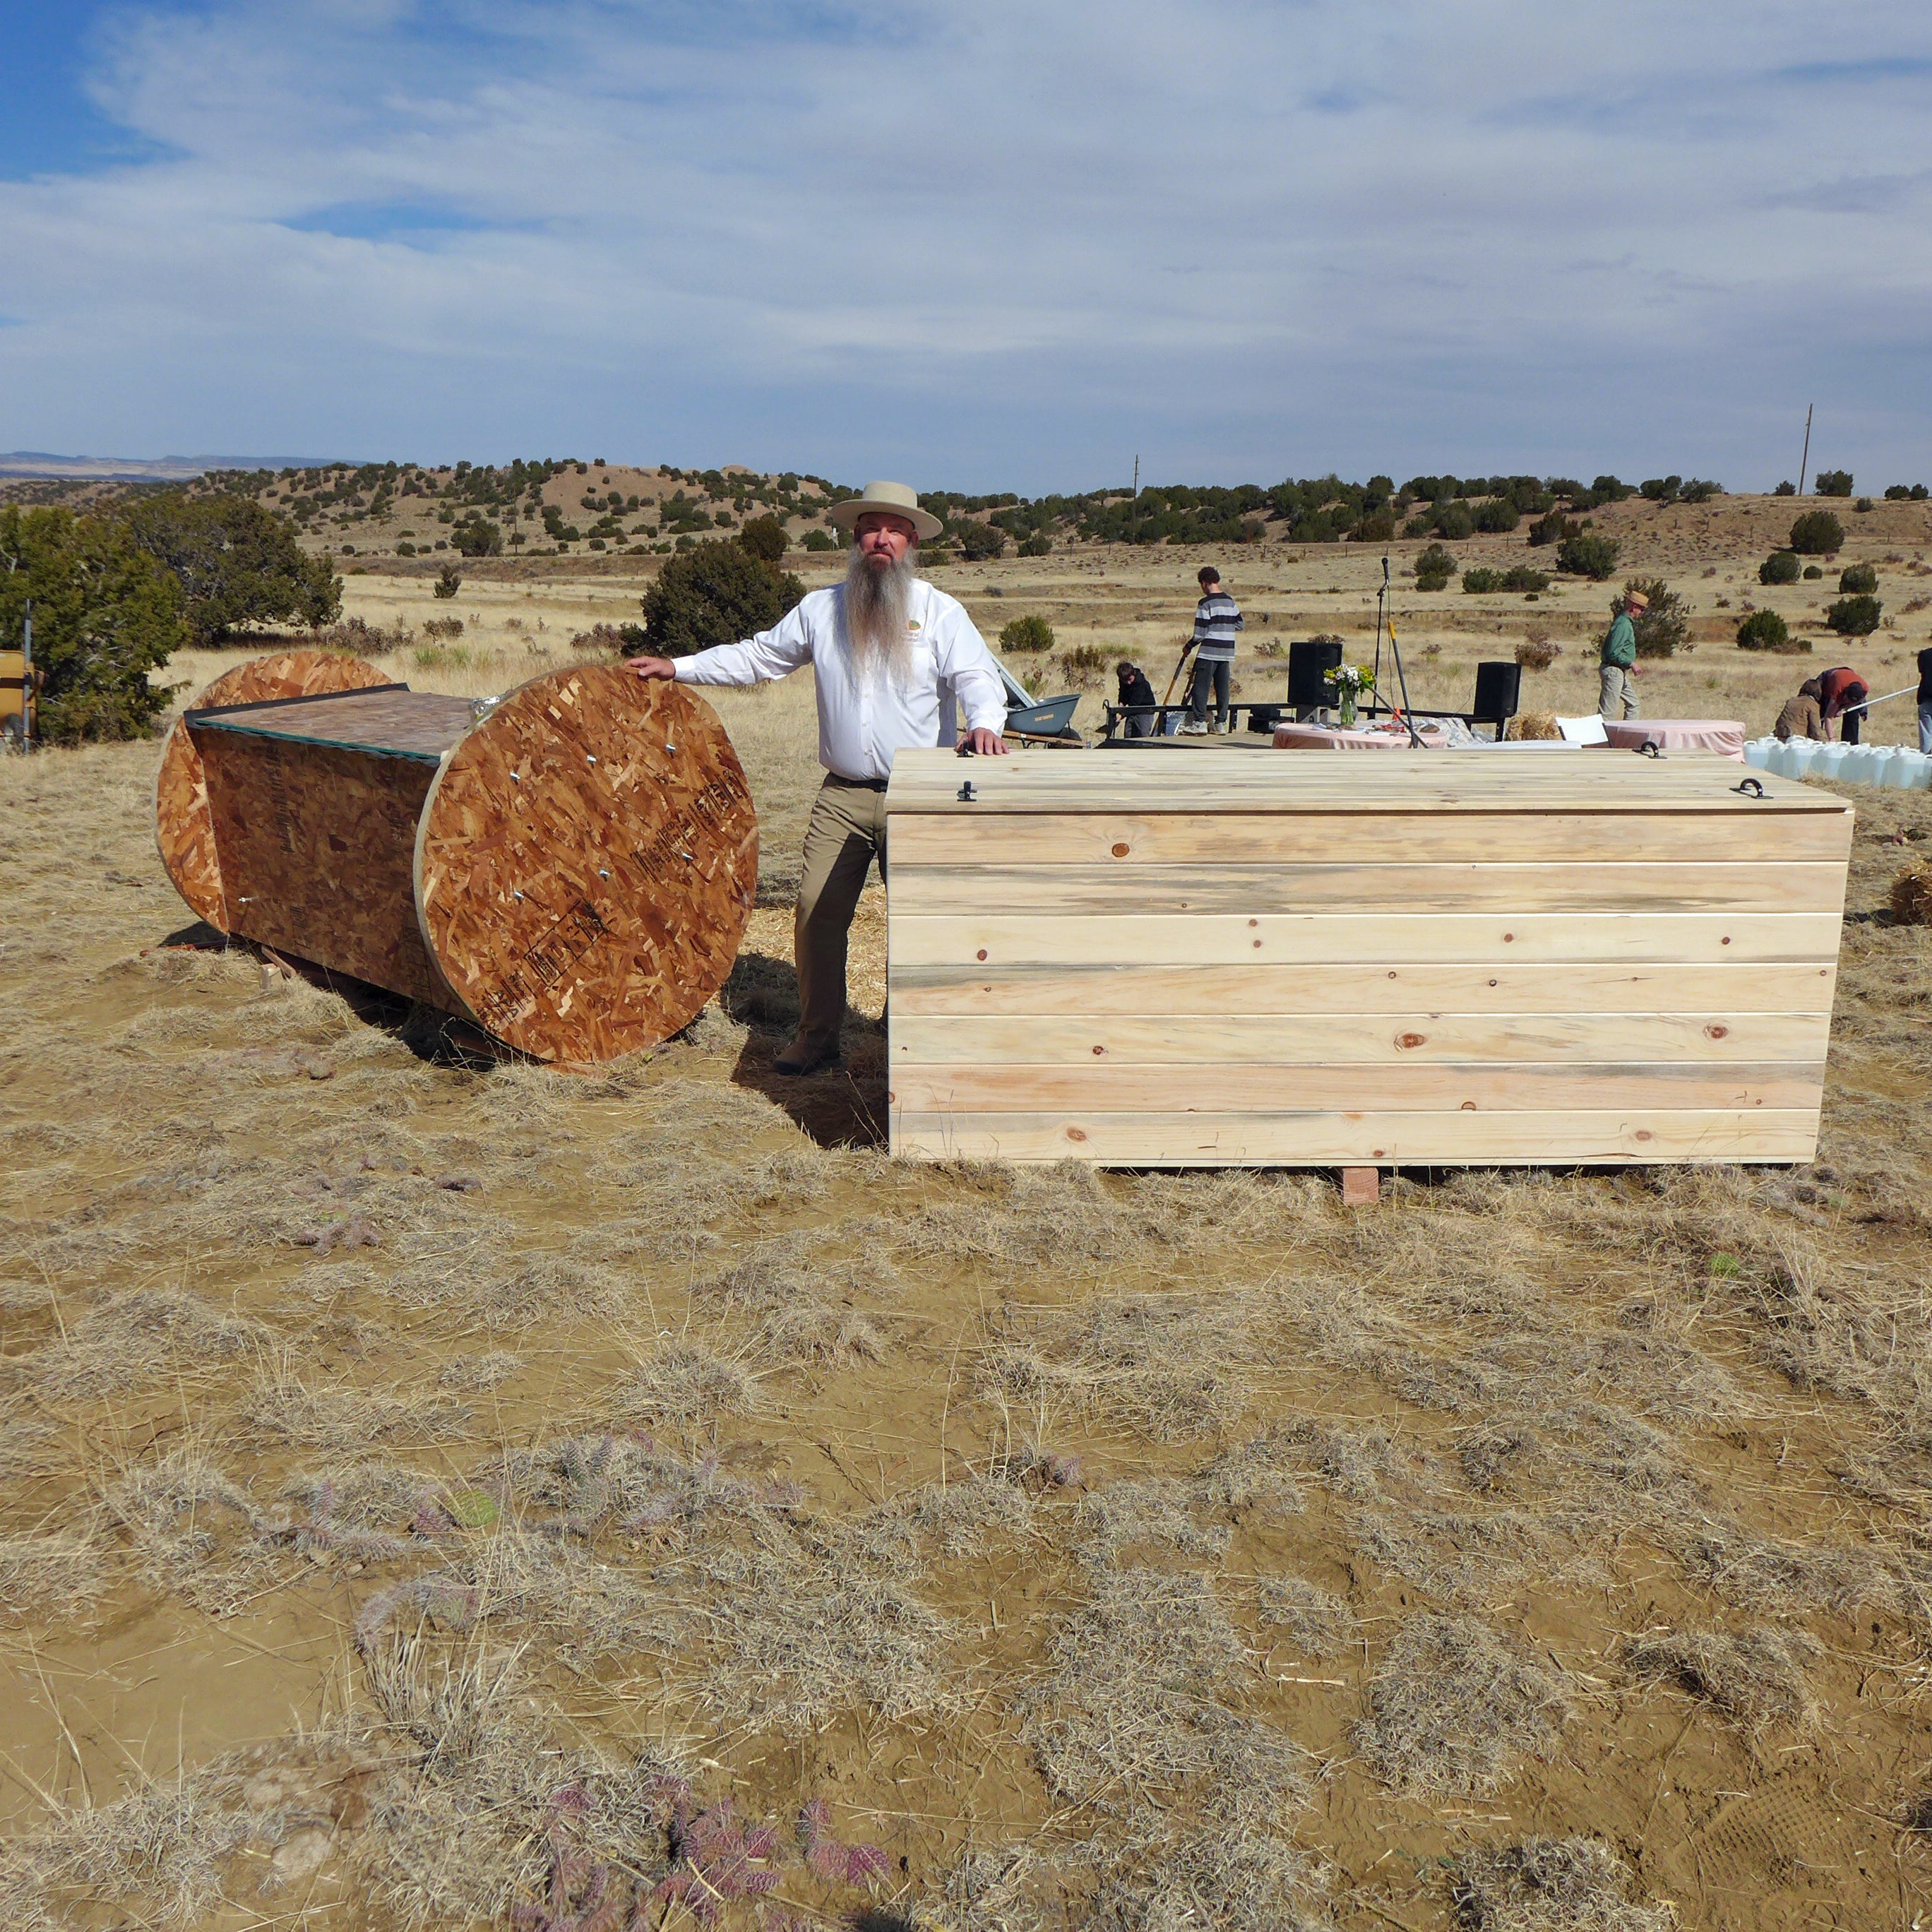 Seth Viddal, who co-owns The Natural Funeral in Colorado, stands between two specially-made chrysallises - which compost human remains